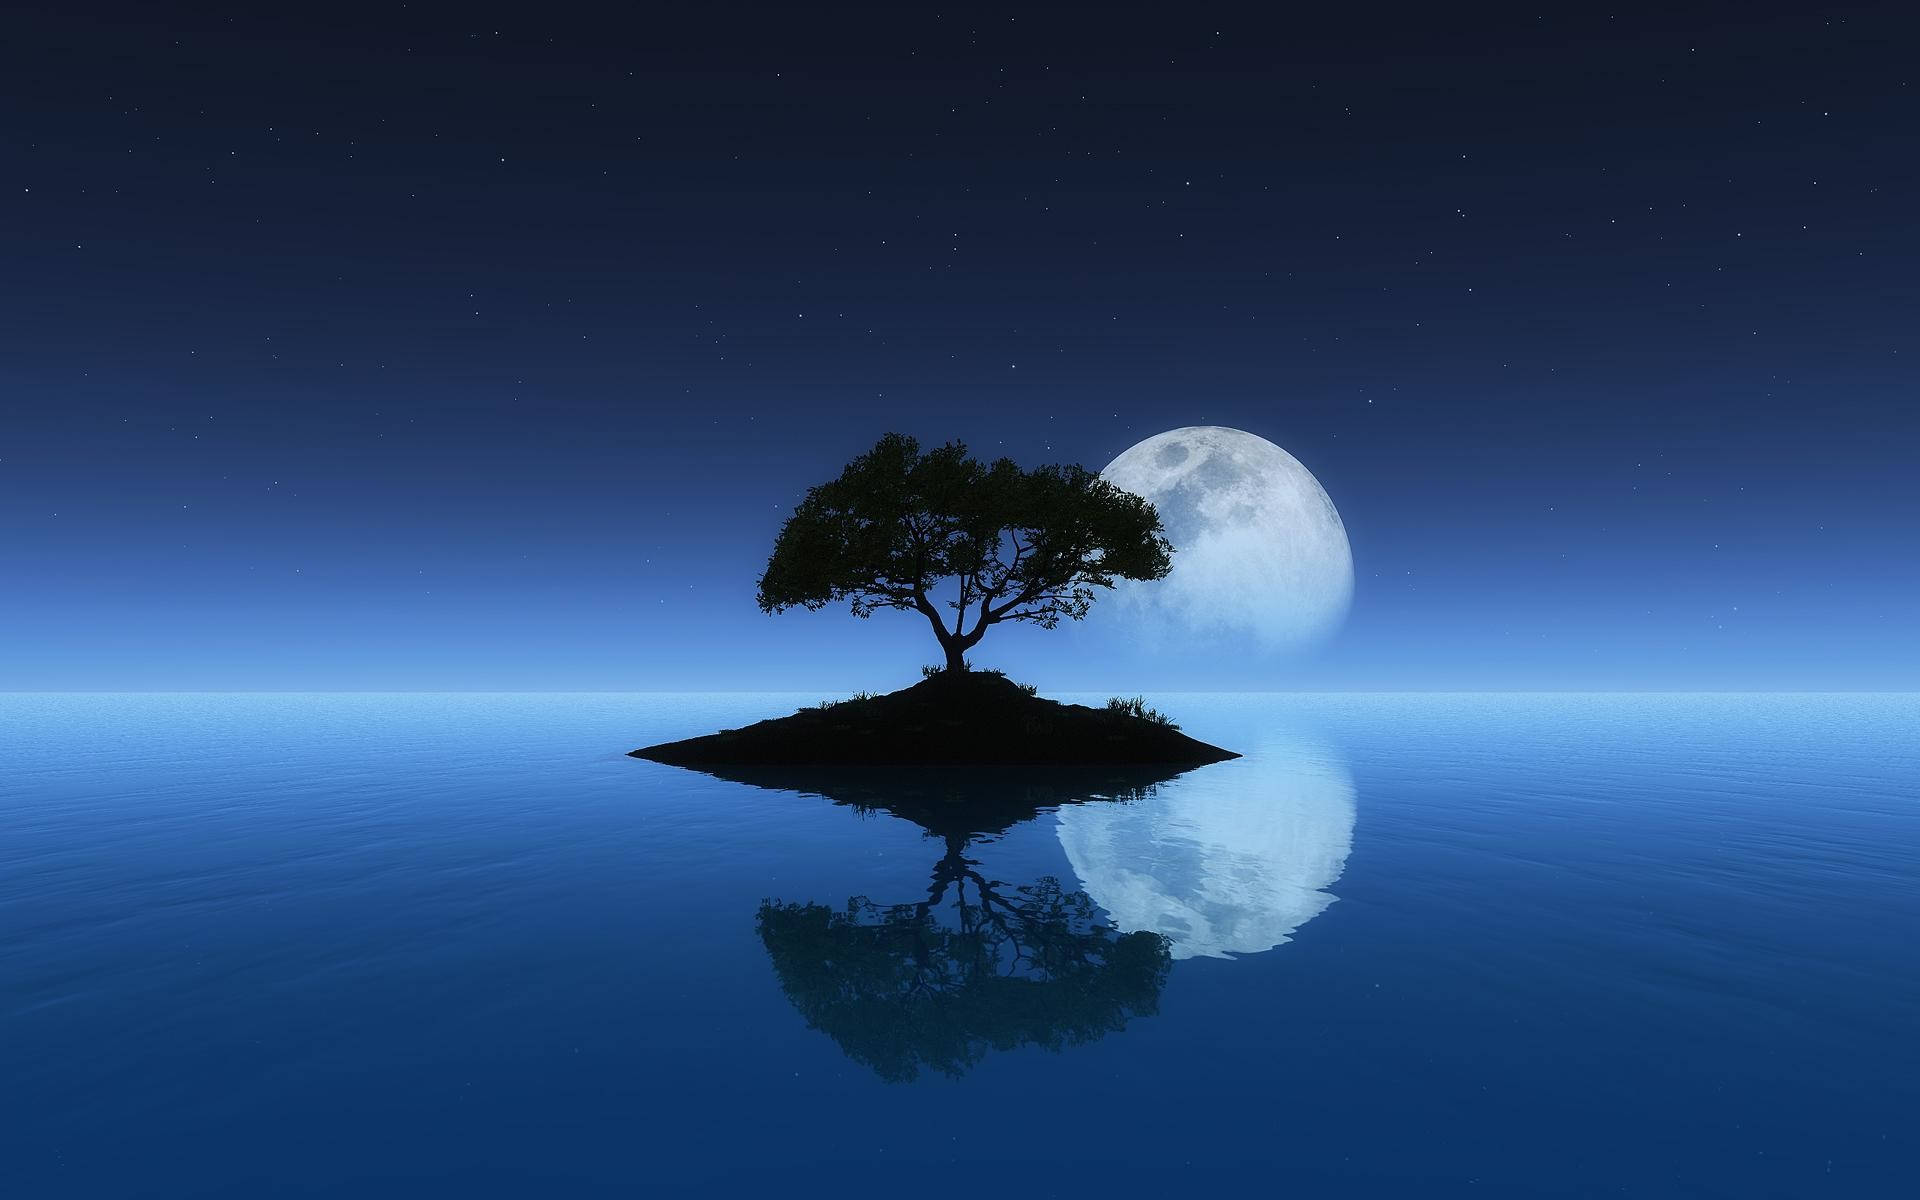 Calming Reflection Of The Full Moon